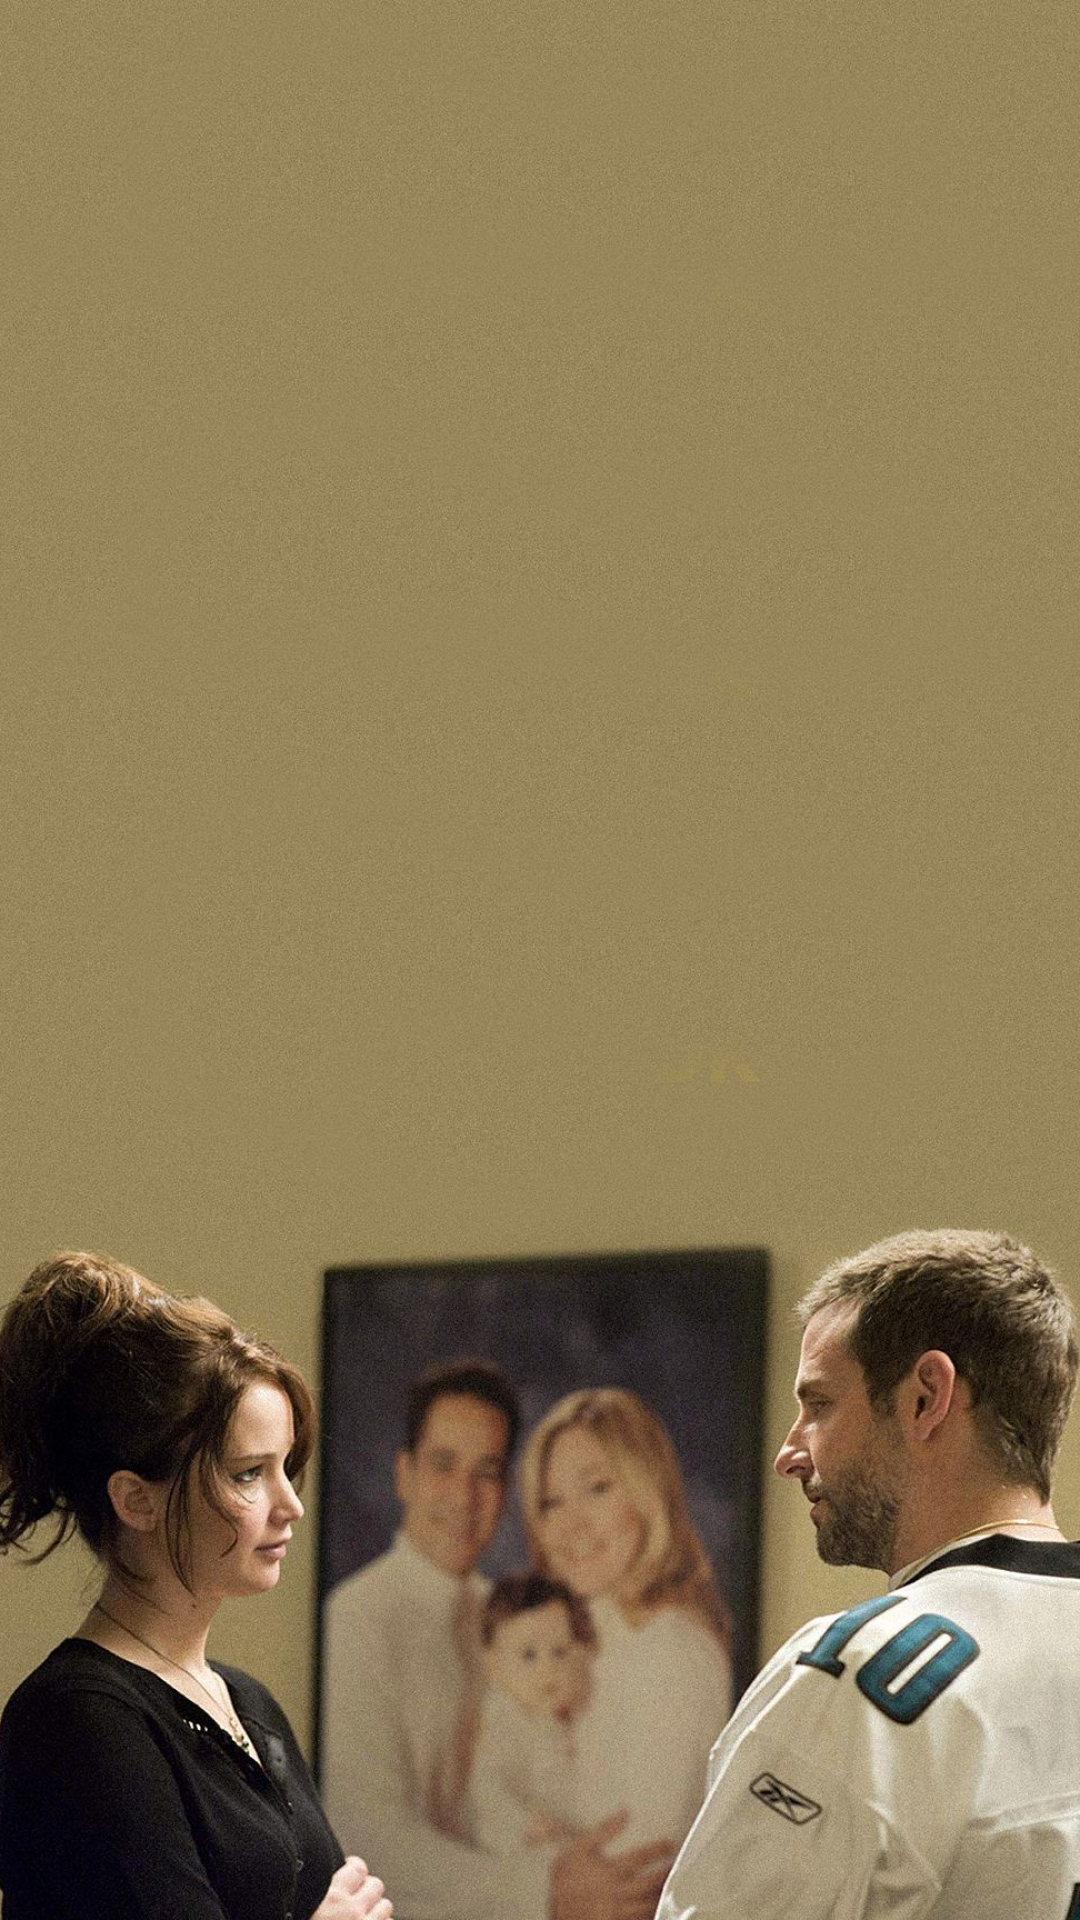 Silver Linings Playbook, Captivating Android wallpaper, Artful poster design, Modern cinematic masterpiece, 1080x1920 Full HD Phone